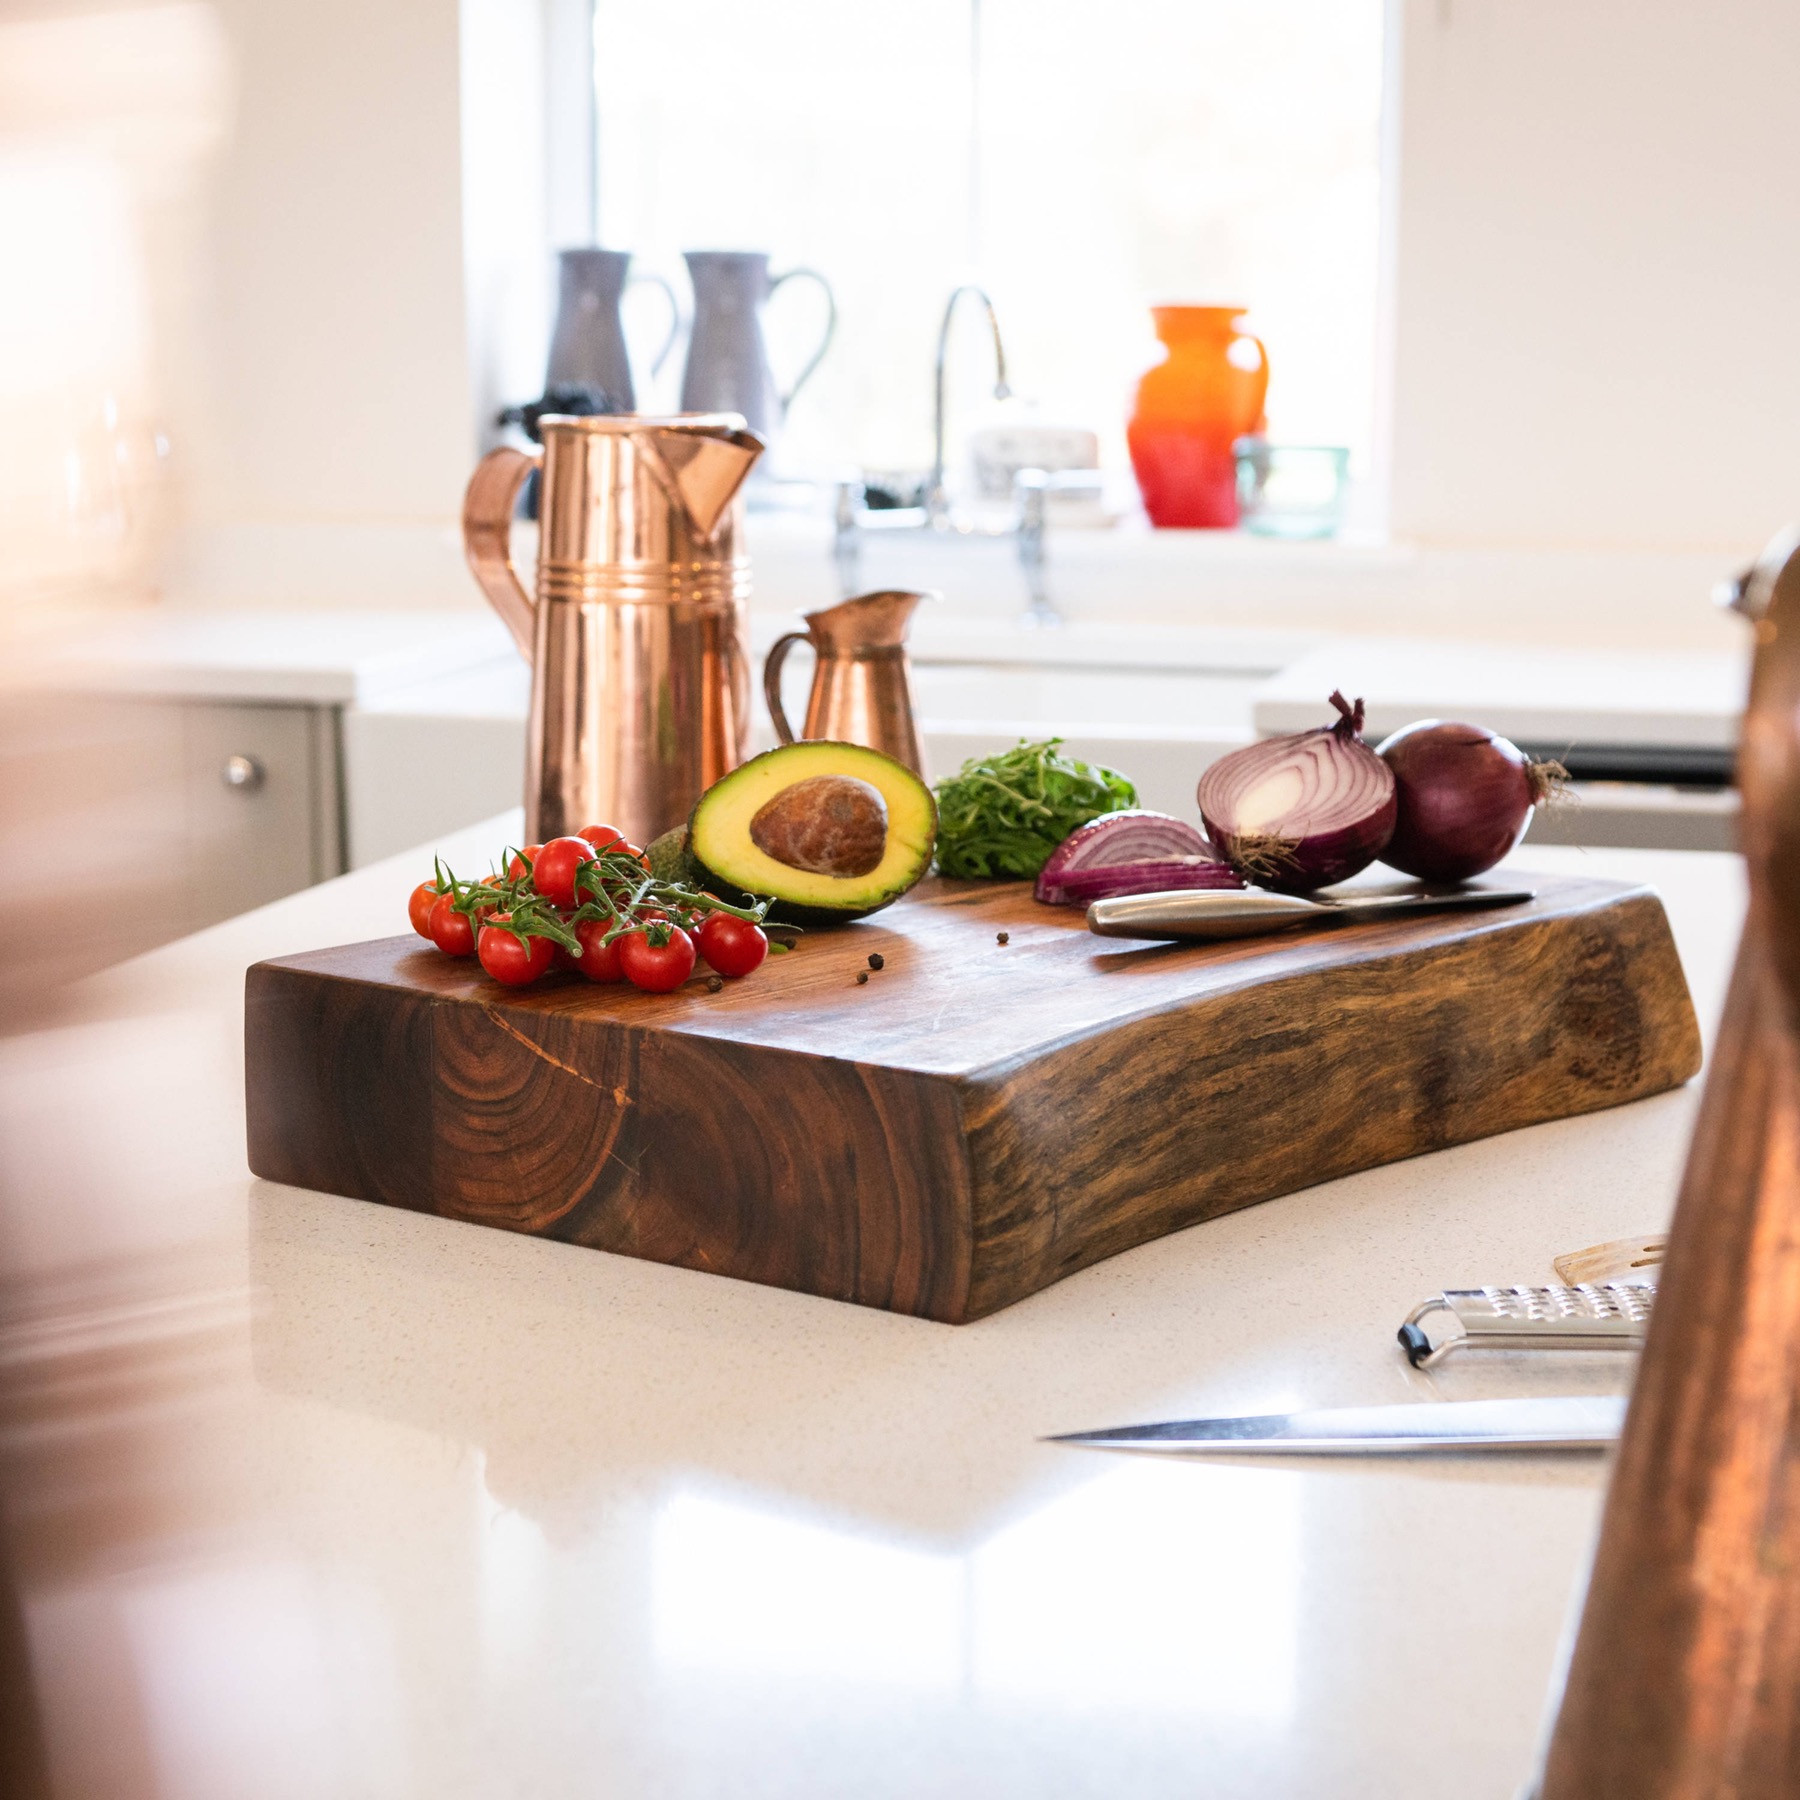 Live Edge Collection Pyman Chopping Board - Image 4